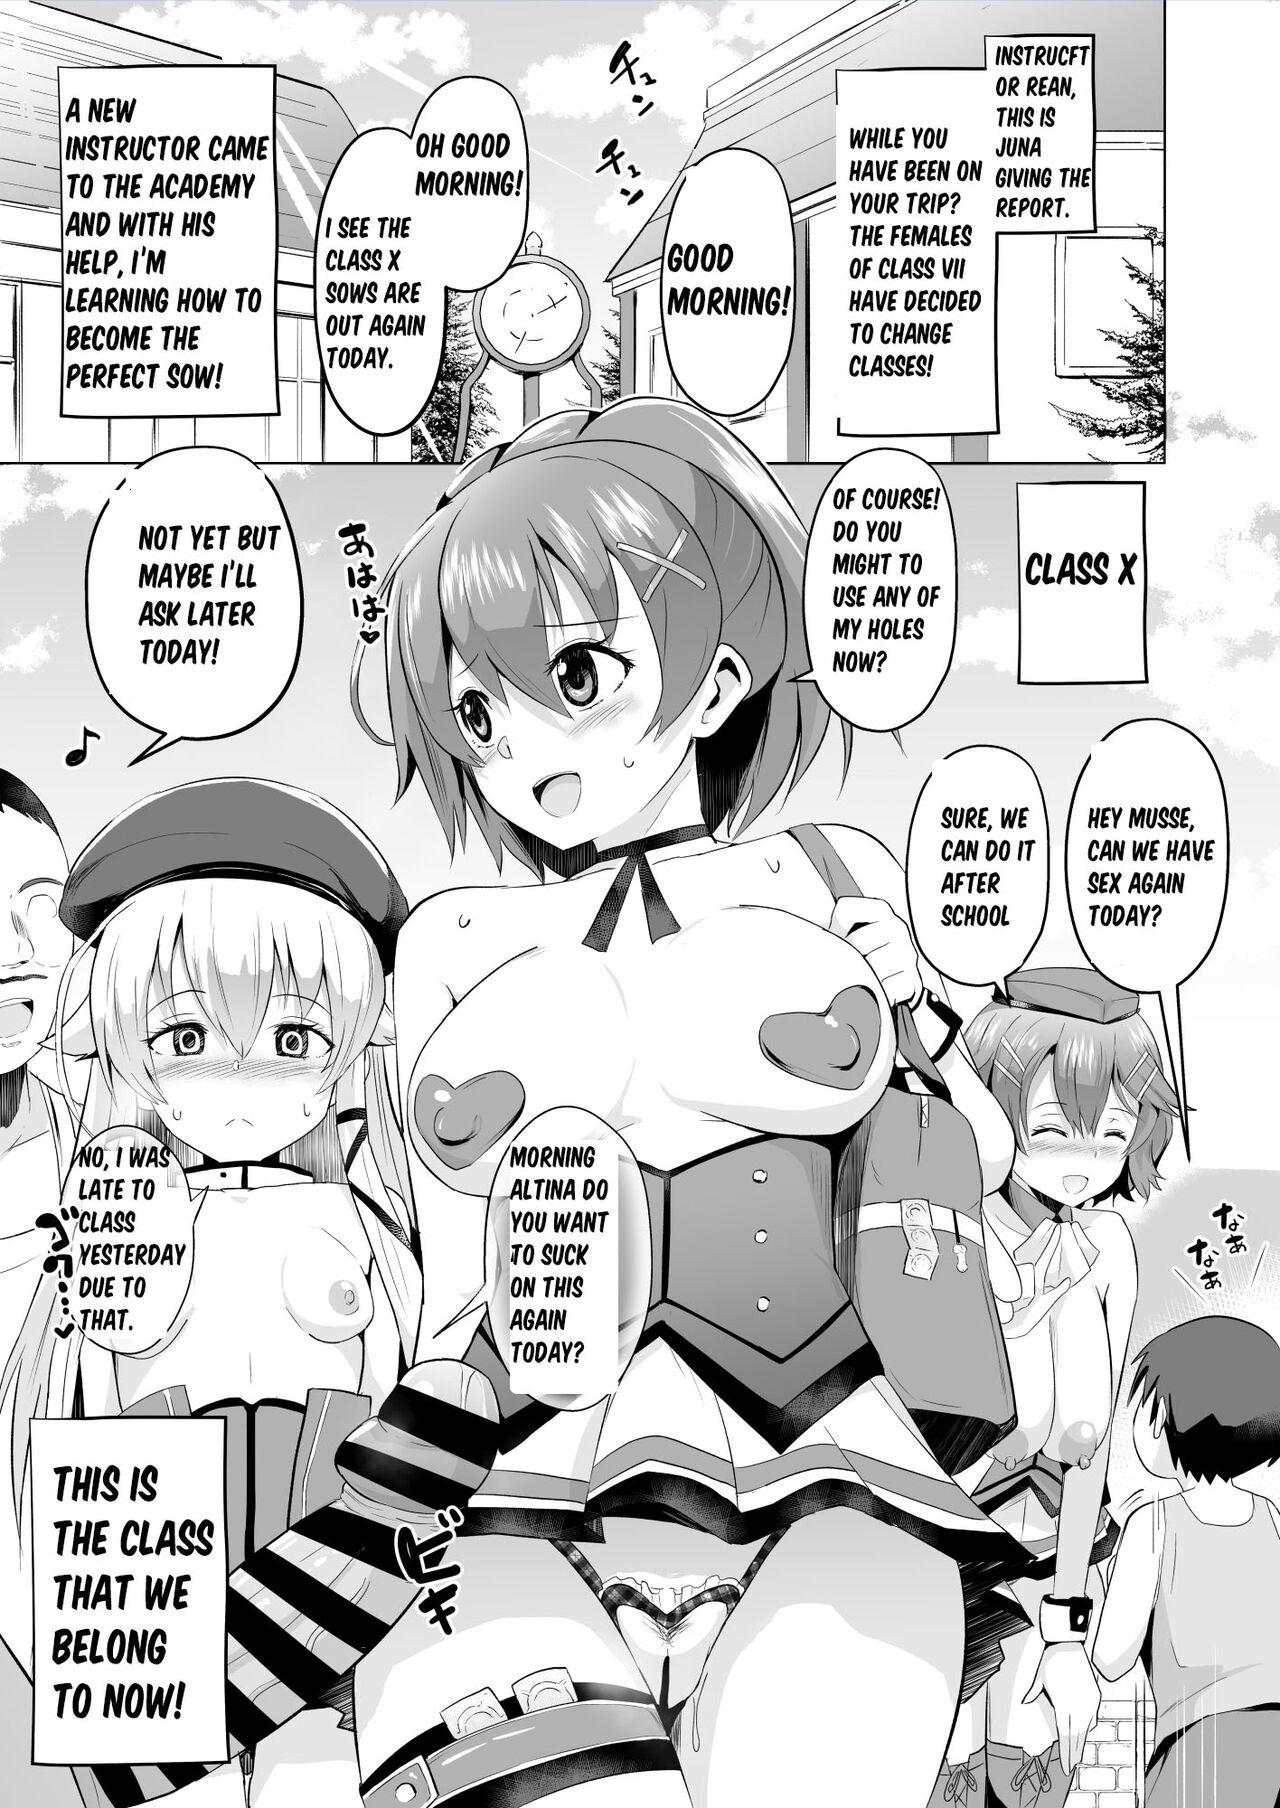 Gaygroup Hypnosis of the New Class VII - Juna's Report - The legend of heroes | eiyuu densetsu Funny - Page 3